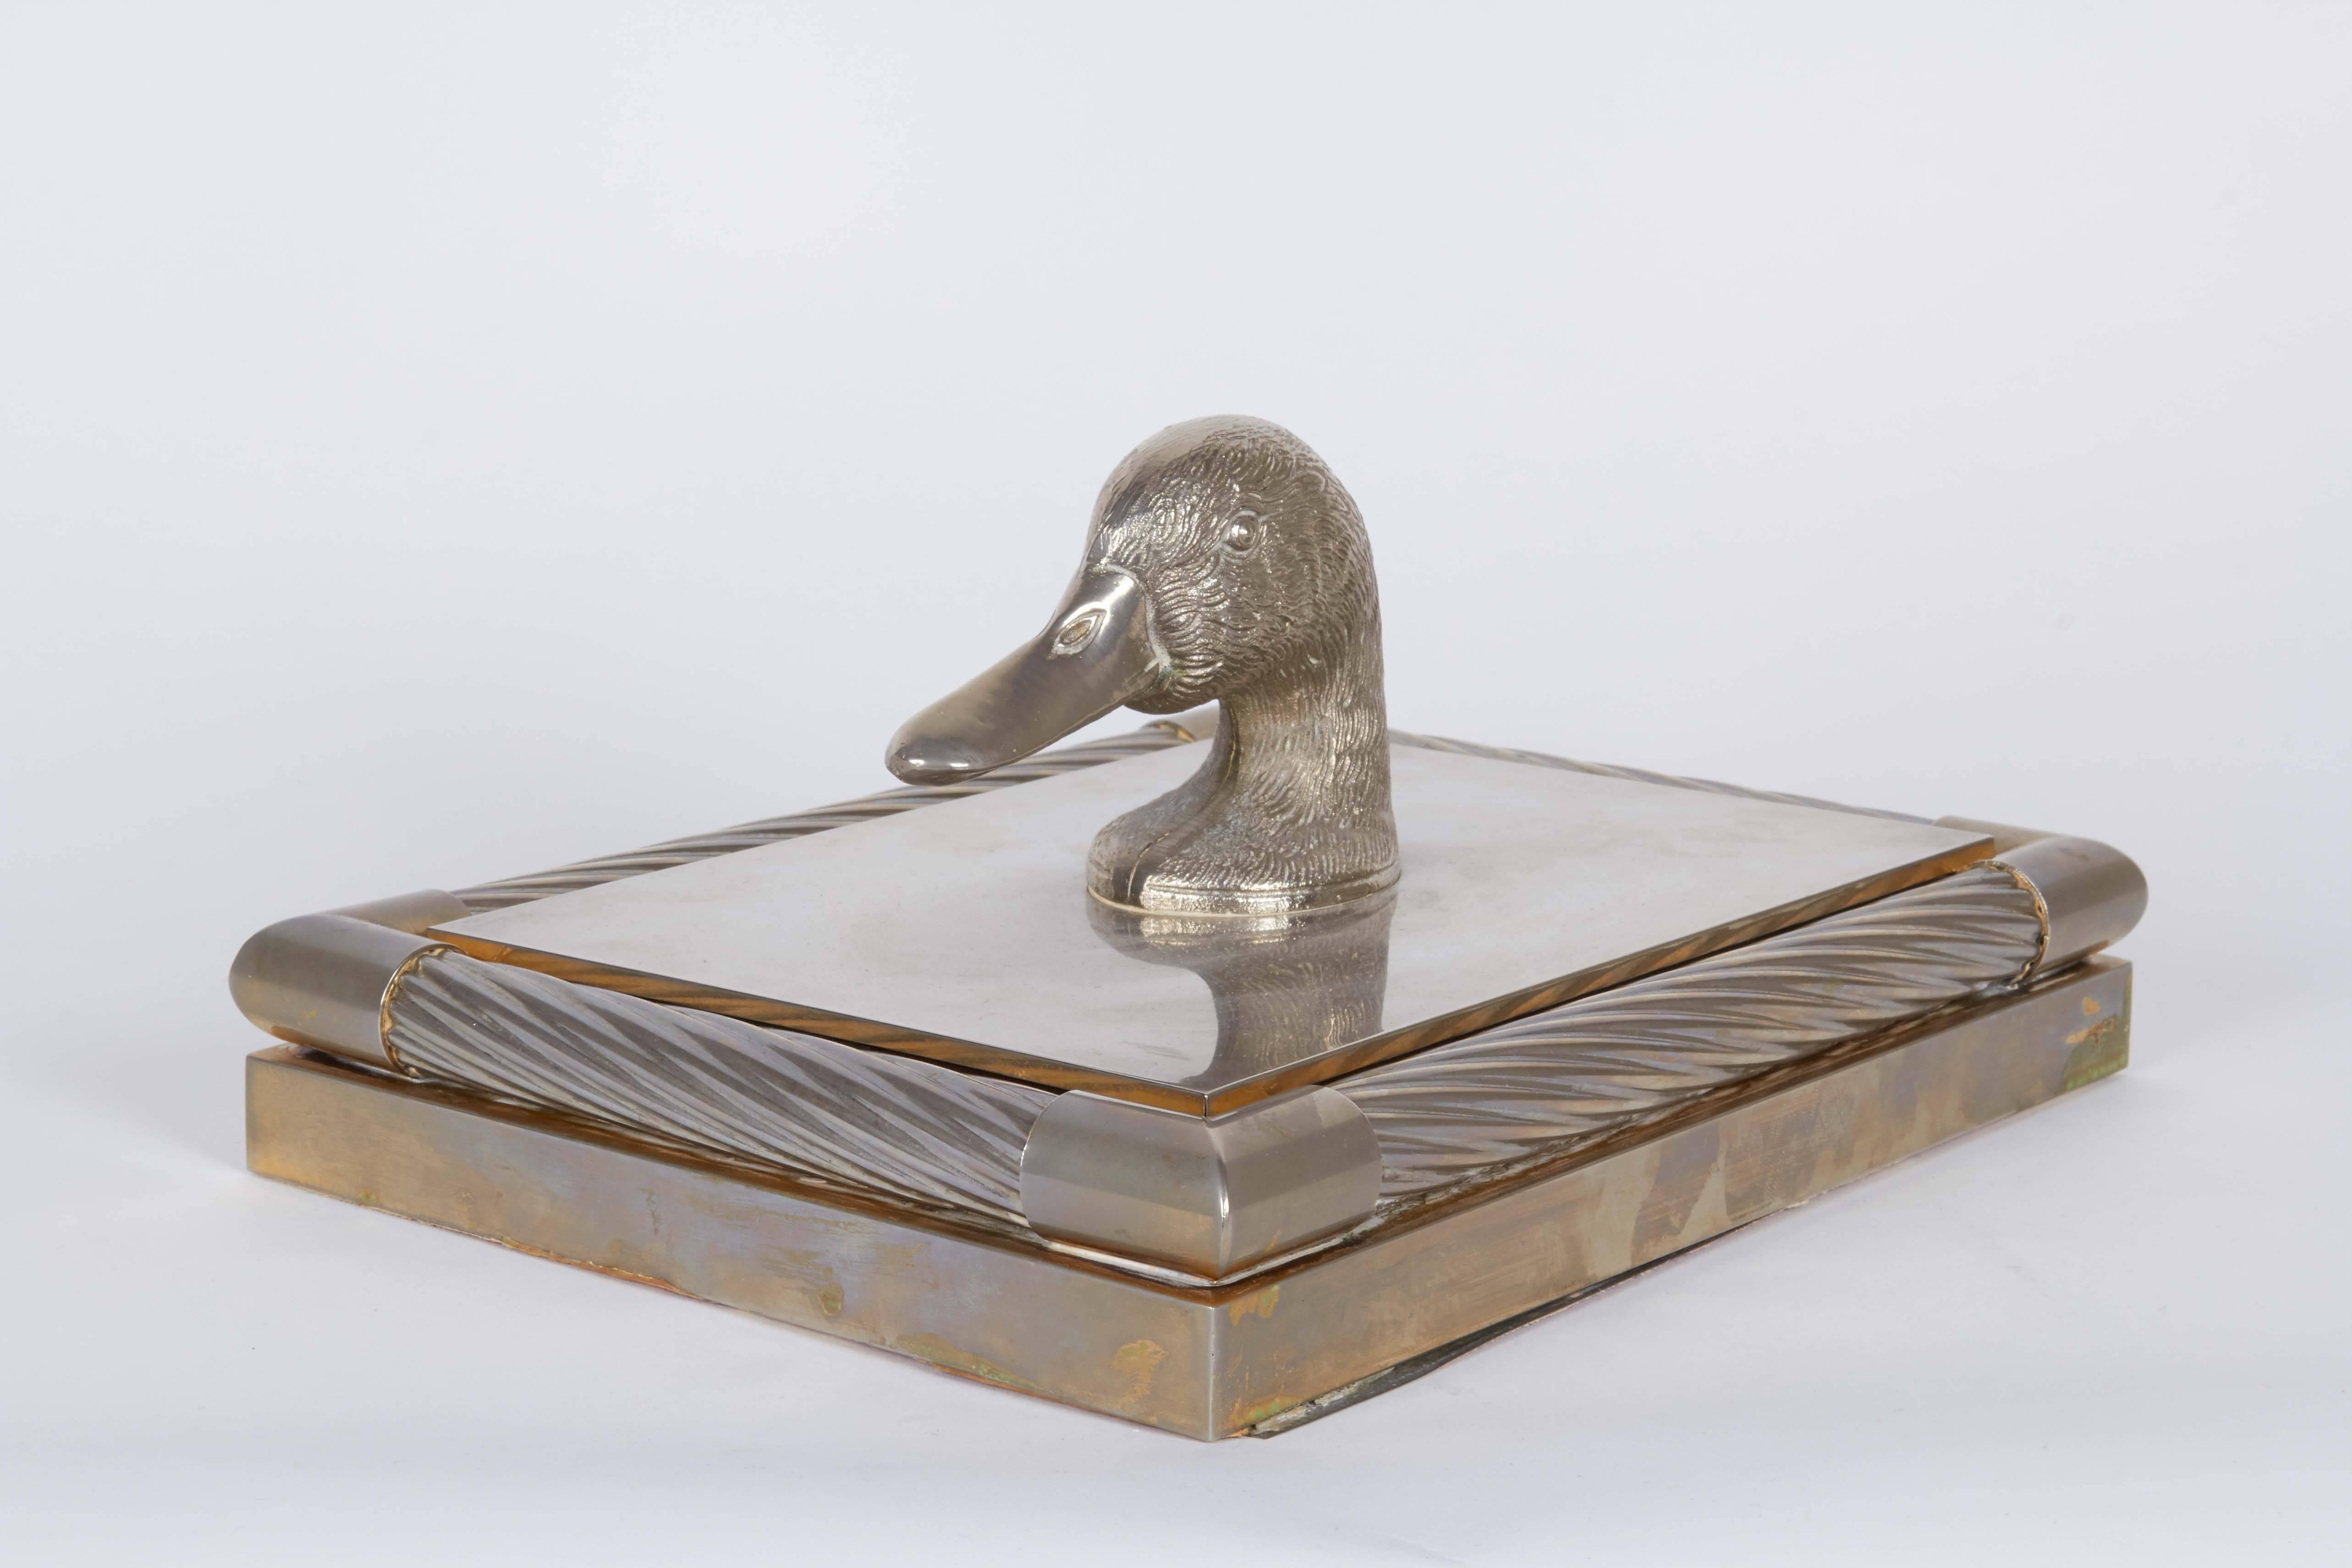 20th Century Decorative Lidded Box with Duck Finial